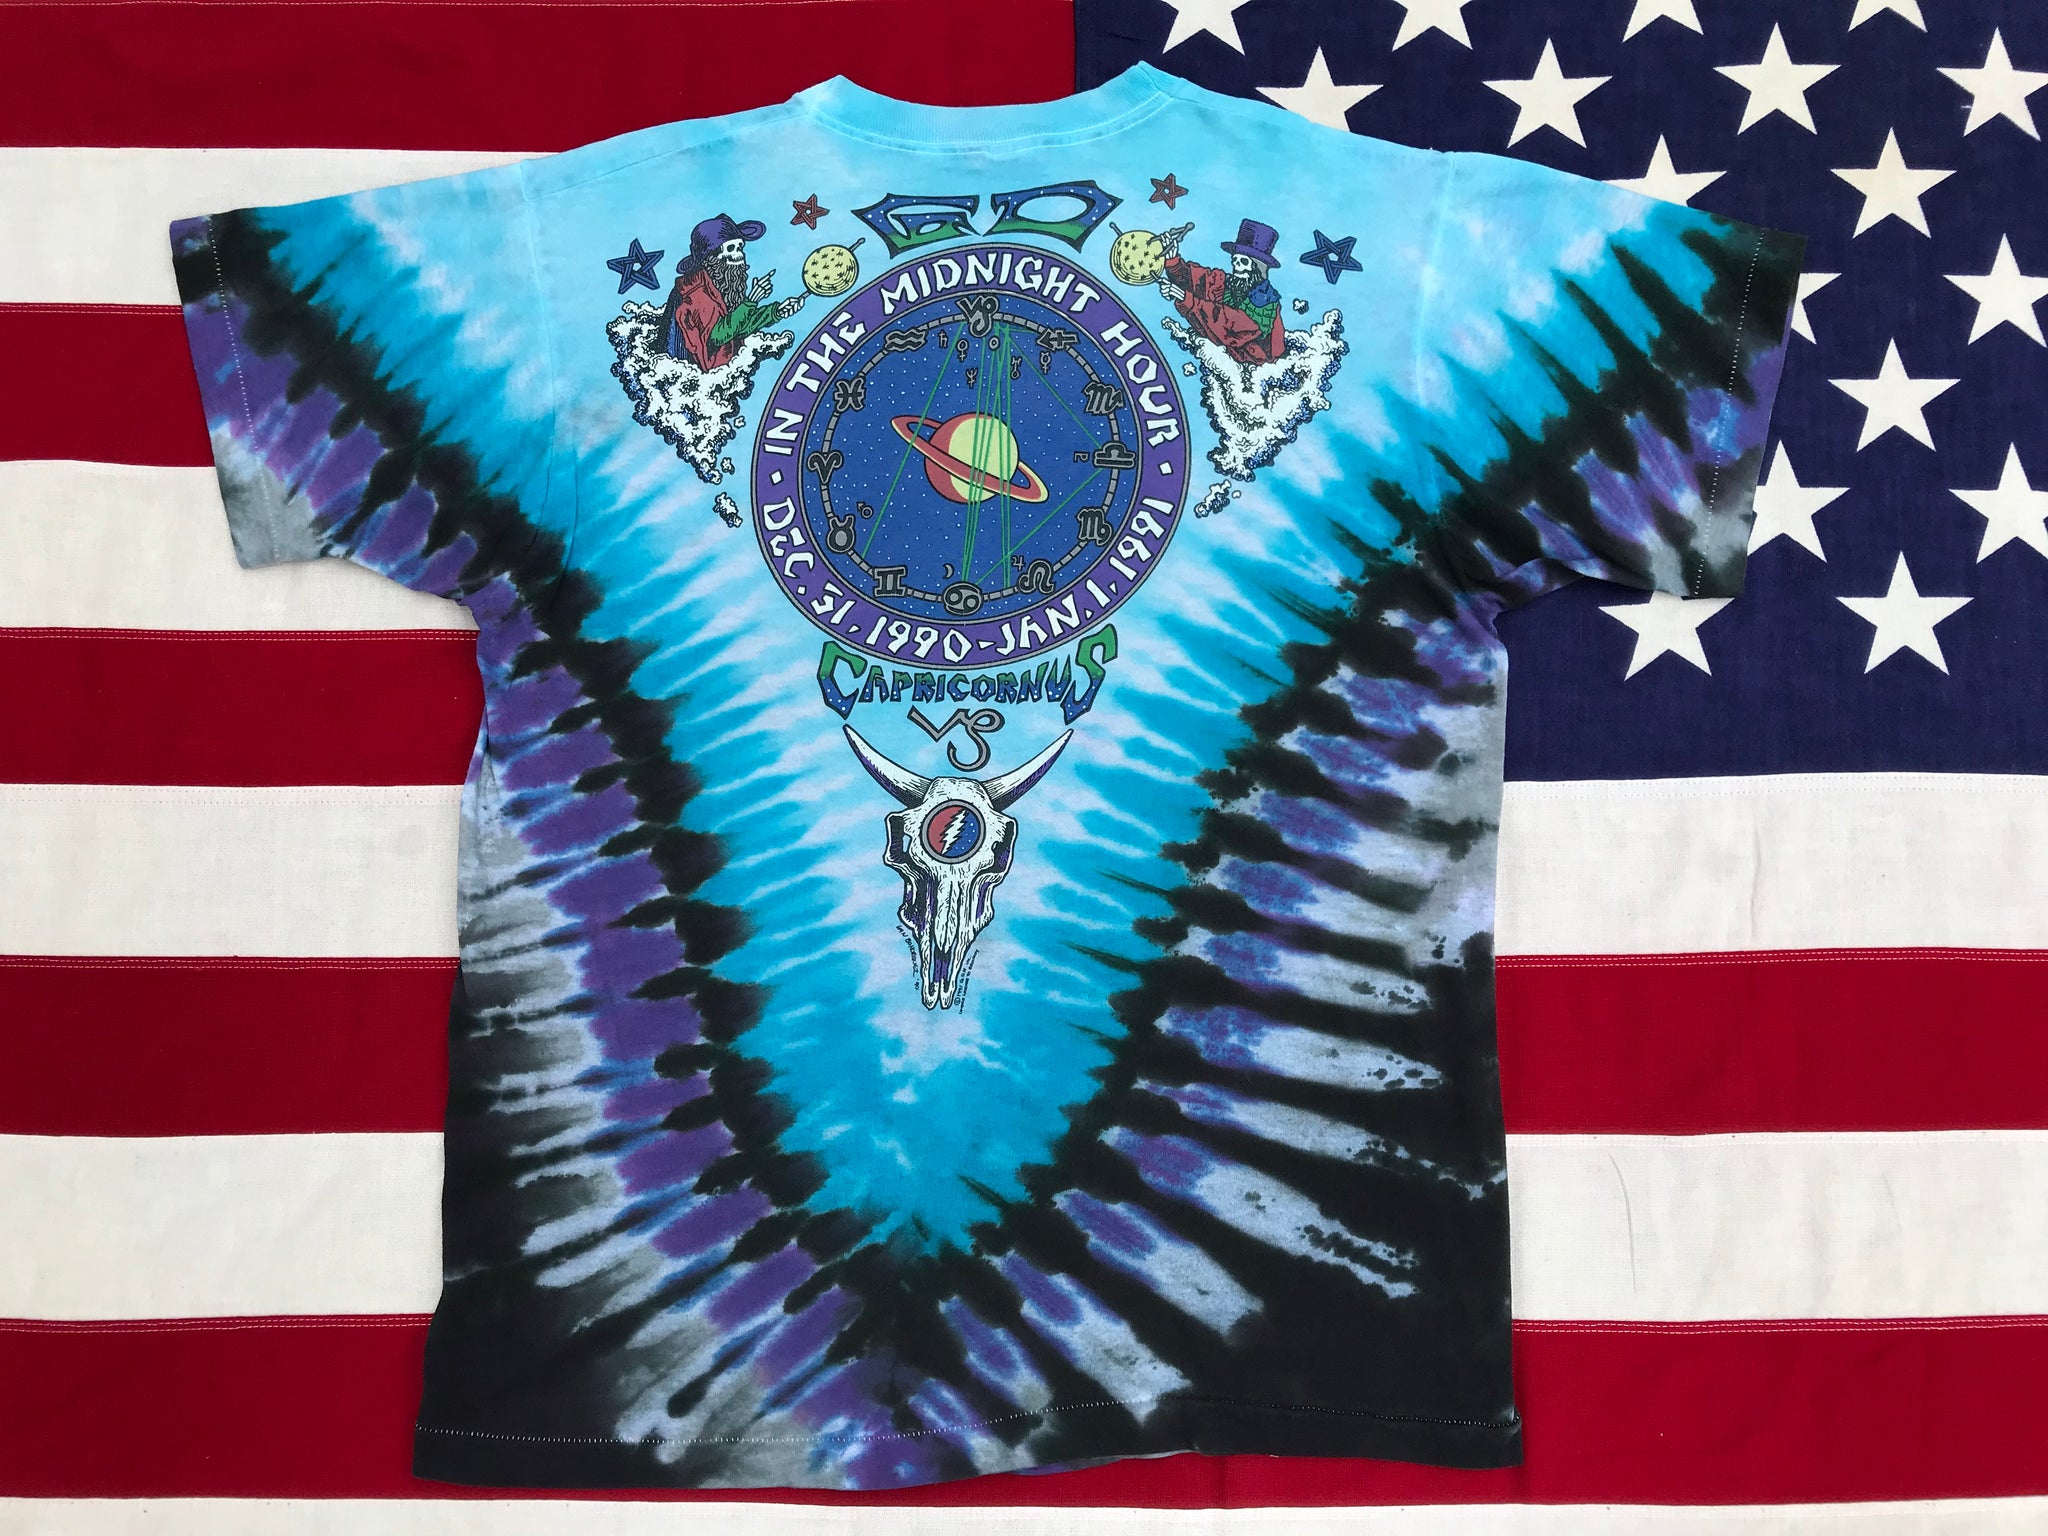 Grateful Dead RARE - Ian Bohorquez “ New Years Eve ‘90 - ‘91 “ Original Vintage Rock Tie Dye T-Shirt by Fruit Of The Loom Made in USA